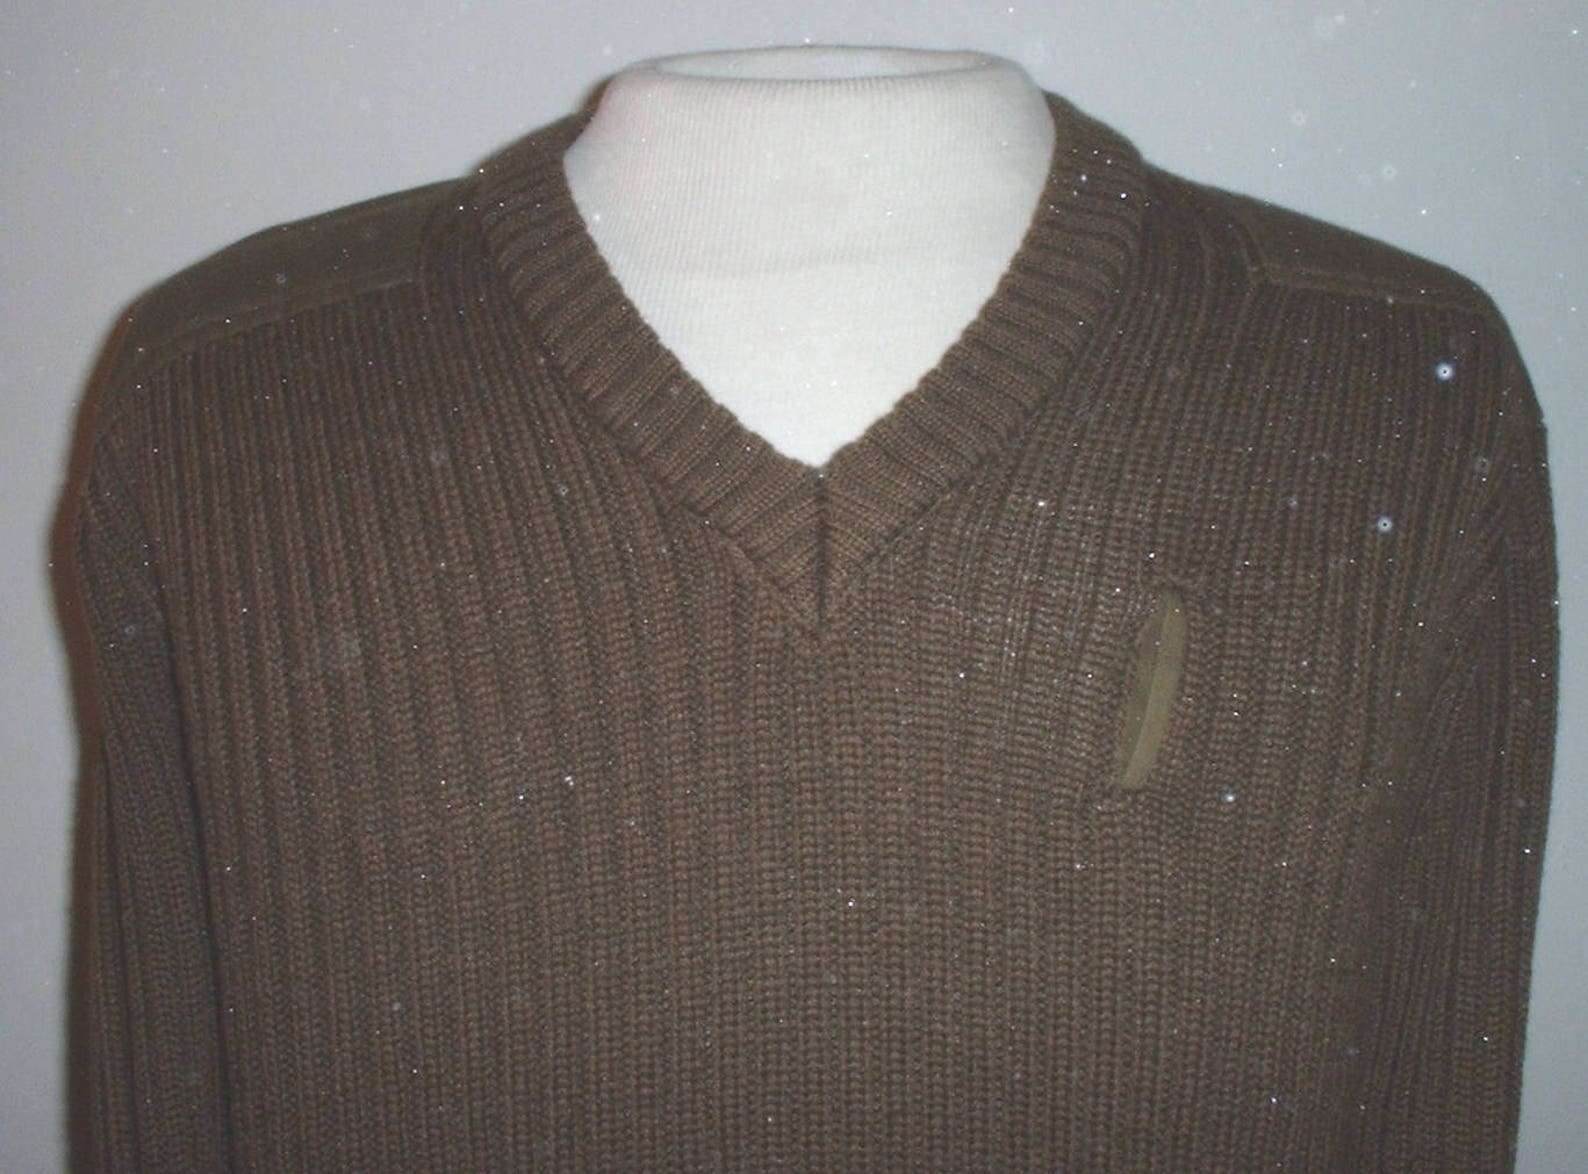 IDF Olive Drab wooly-pully Sweater Missing - Etsy